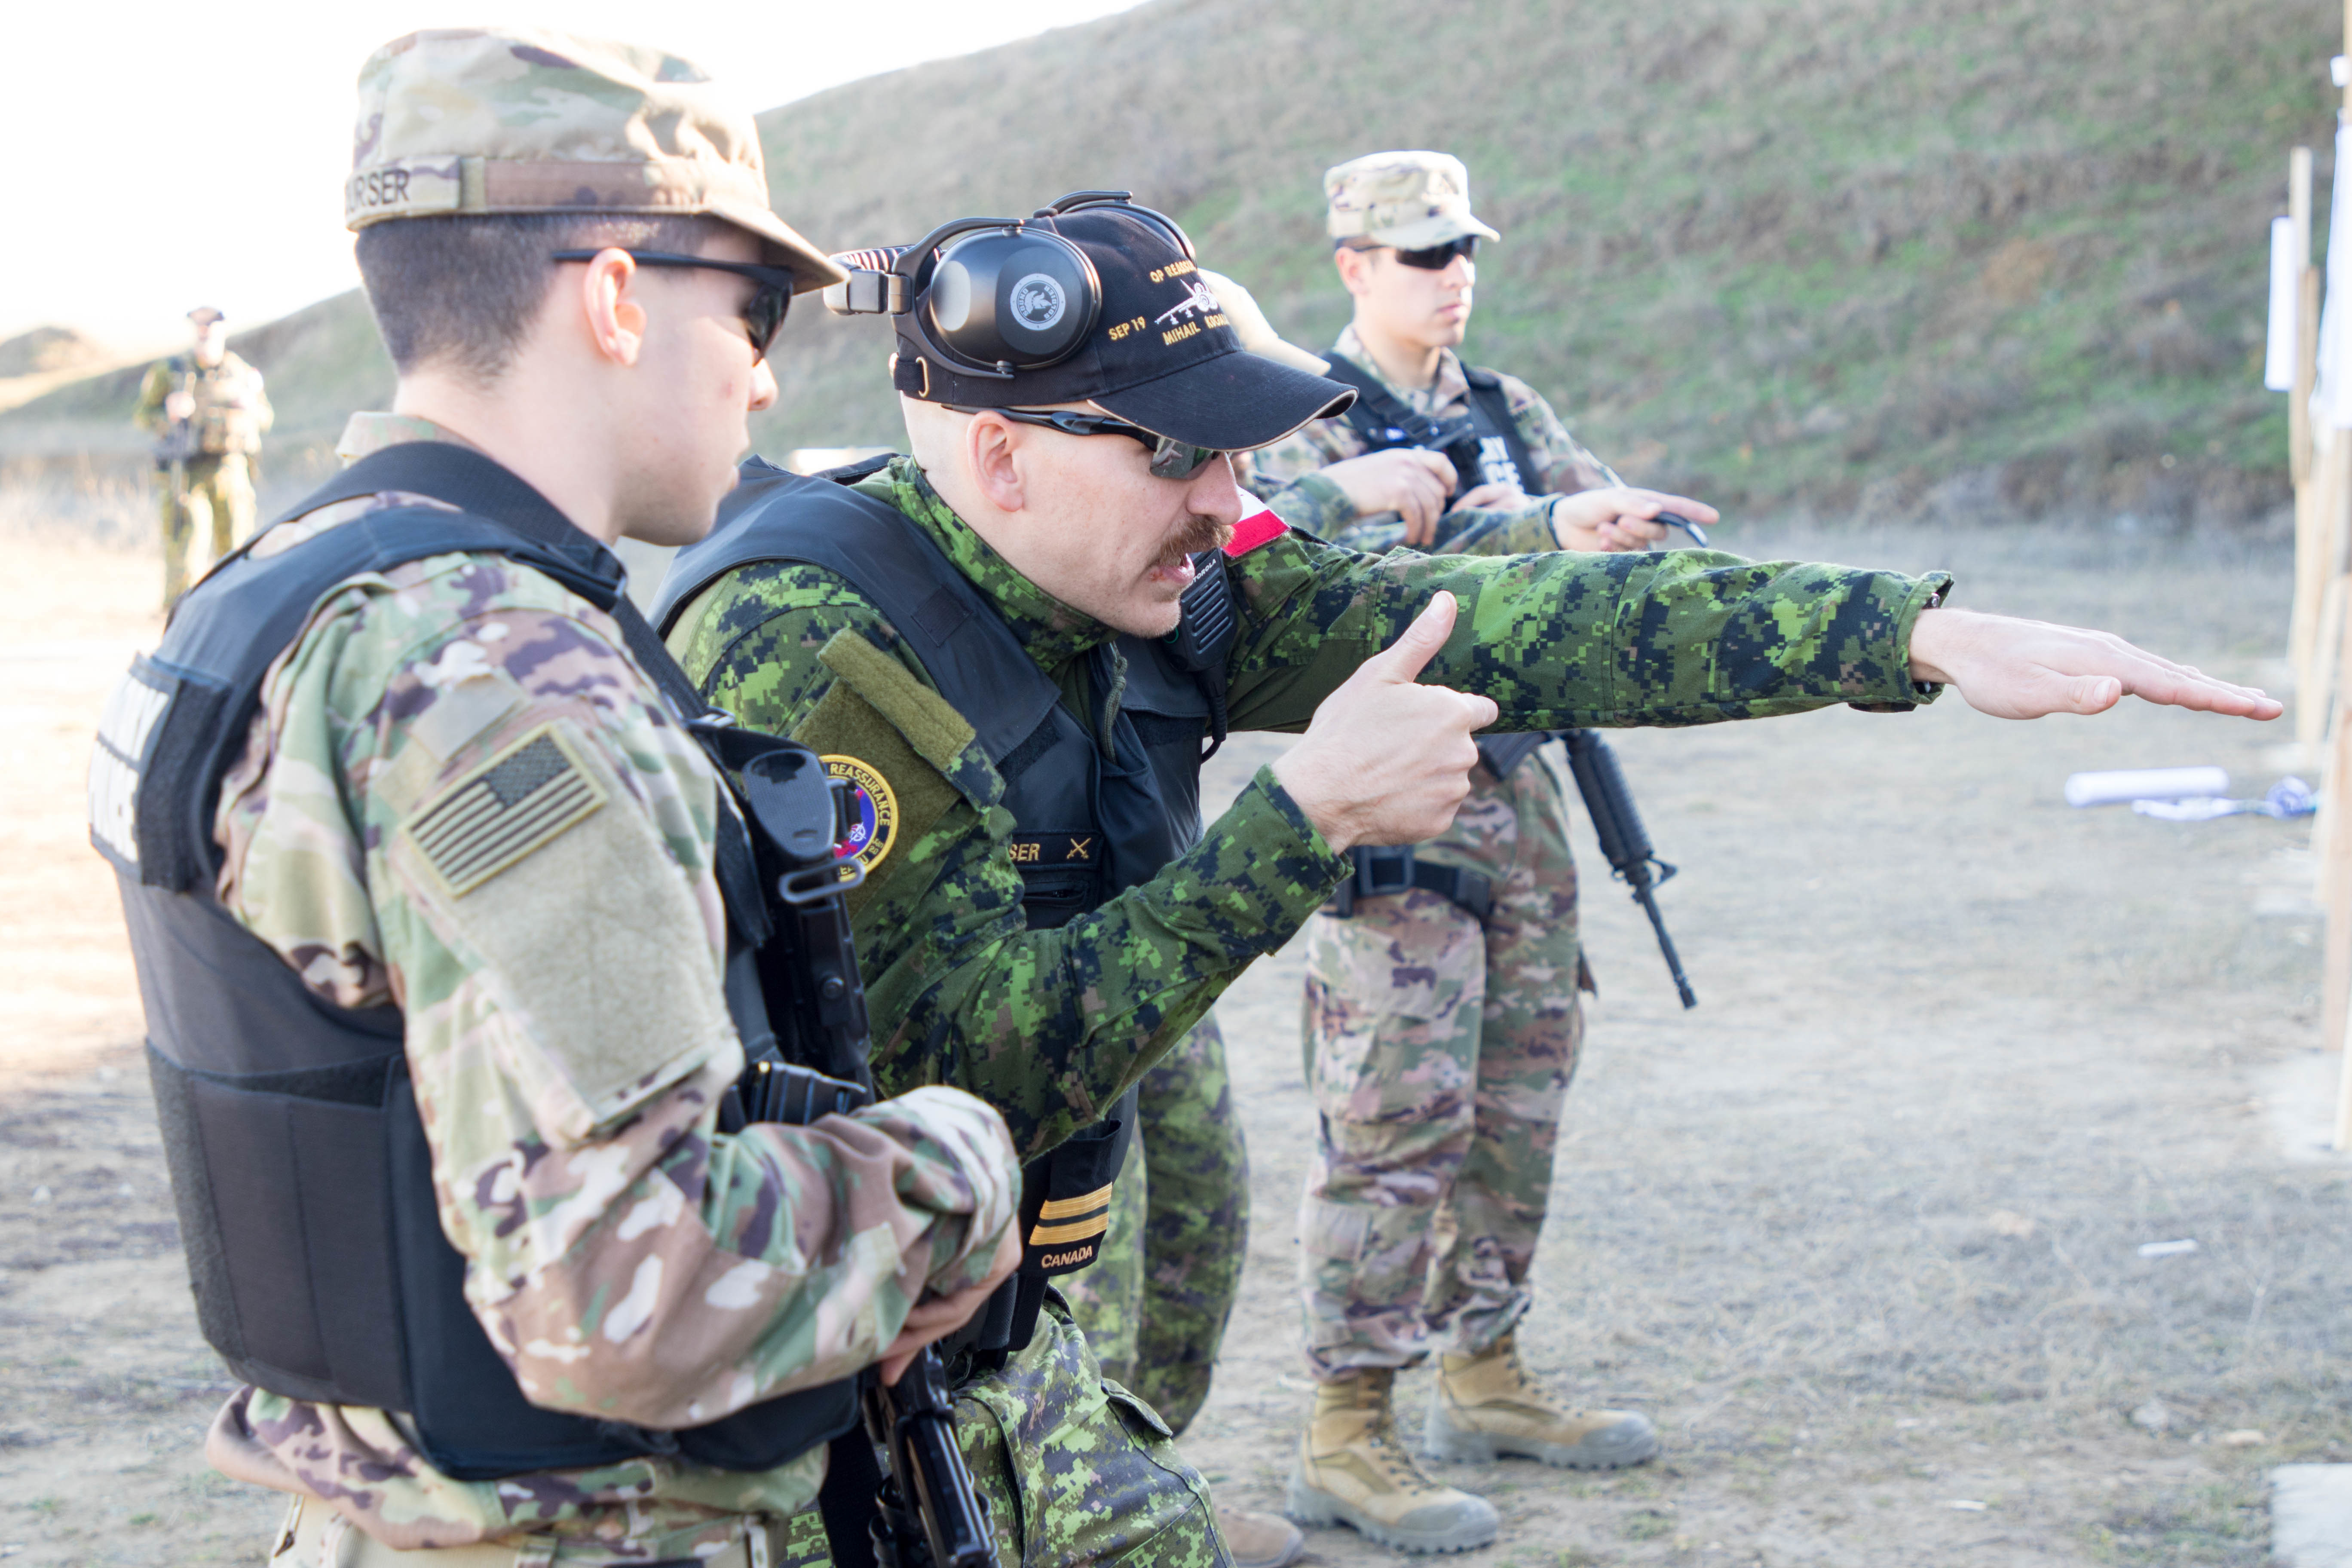 u-s-and-canadian-military-police-conduct-weapons-training-in-romania-u-s-army-reserve-news